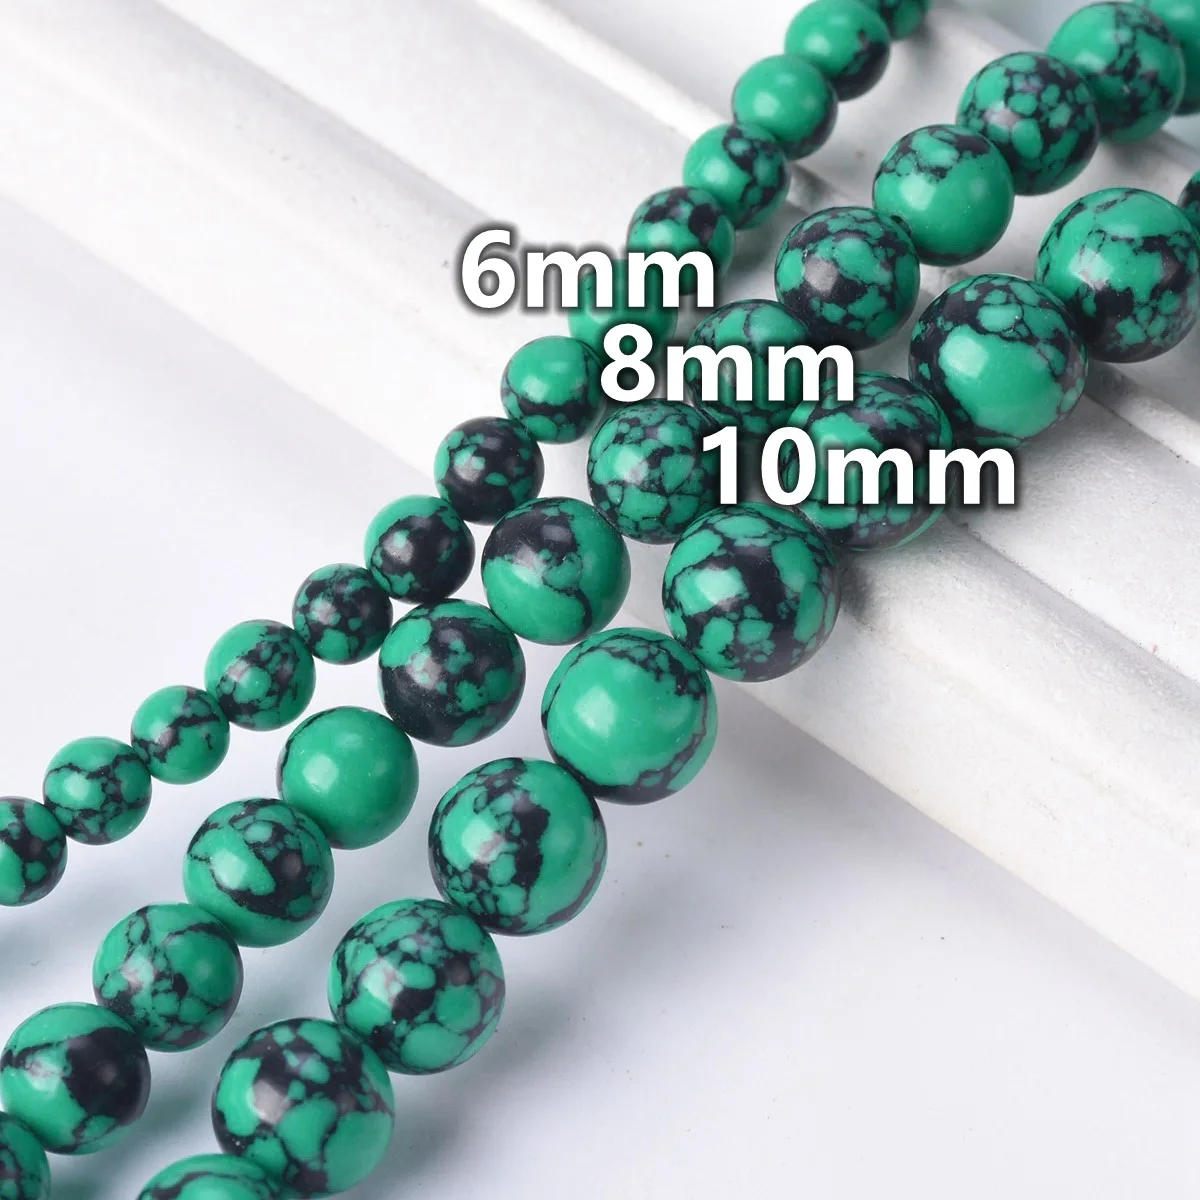 50pcs 8mm Round Black Spots Coated Opaque Glass Beads lot for